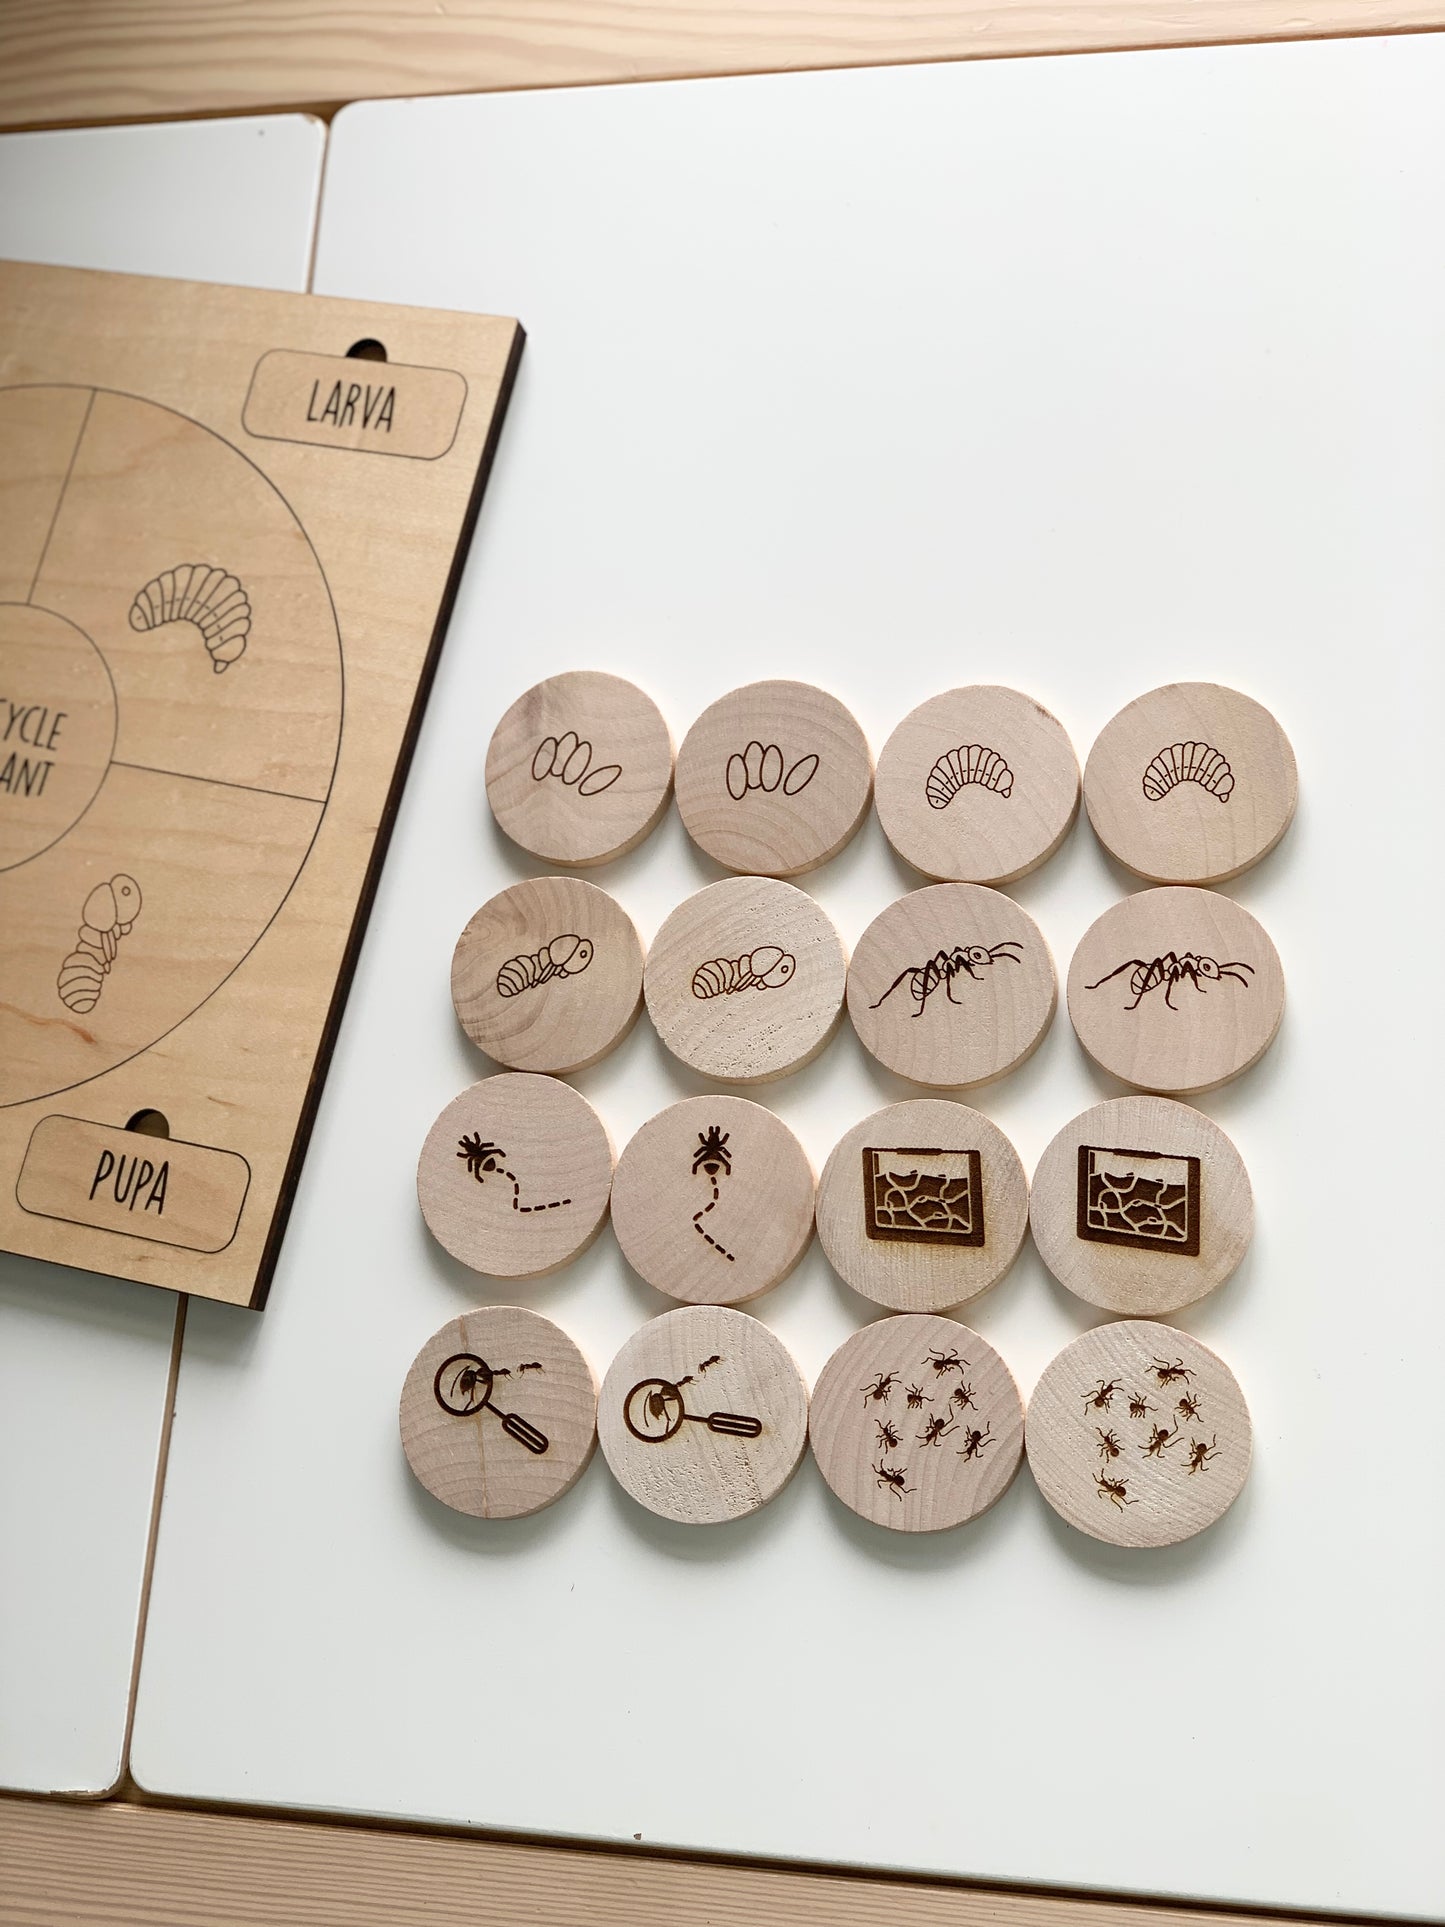 Ant Life Cycle Memory Game